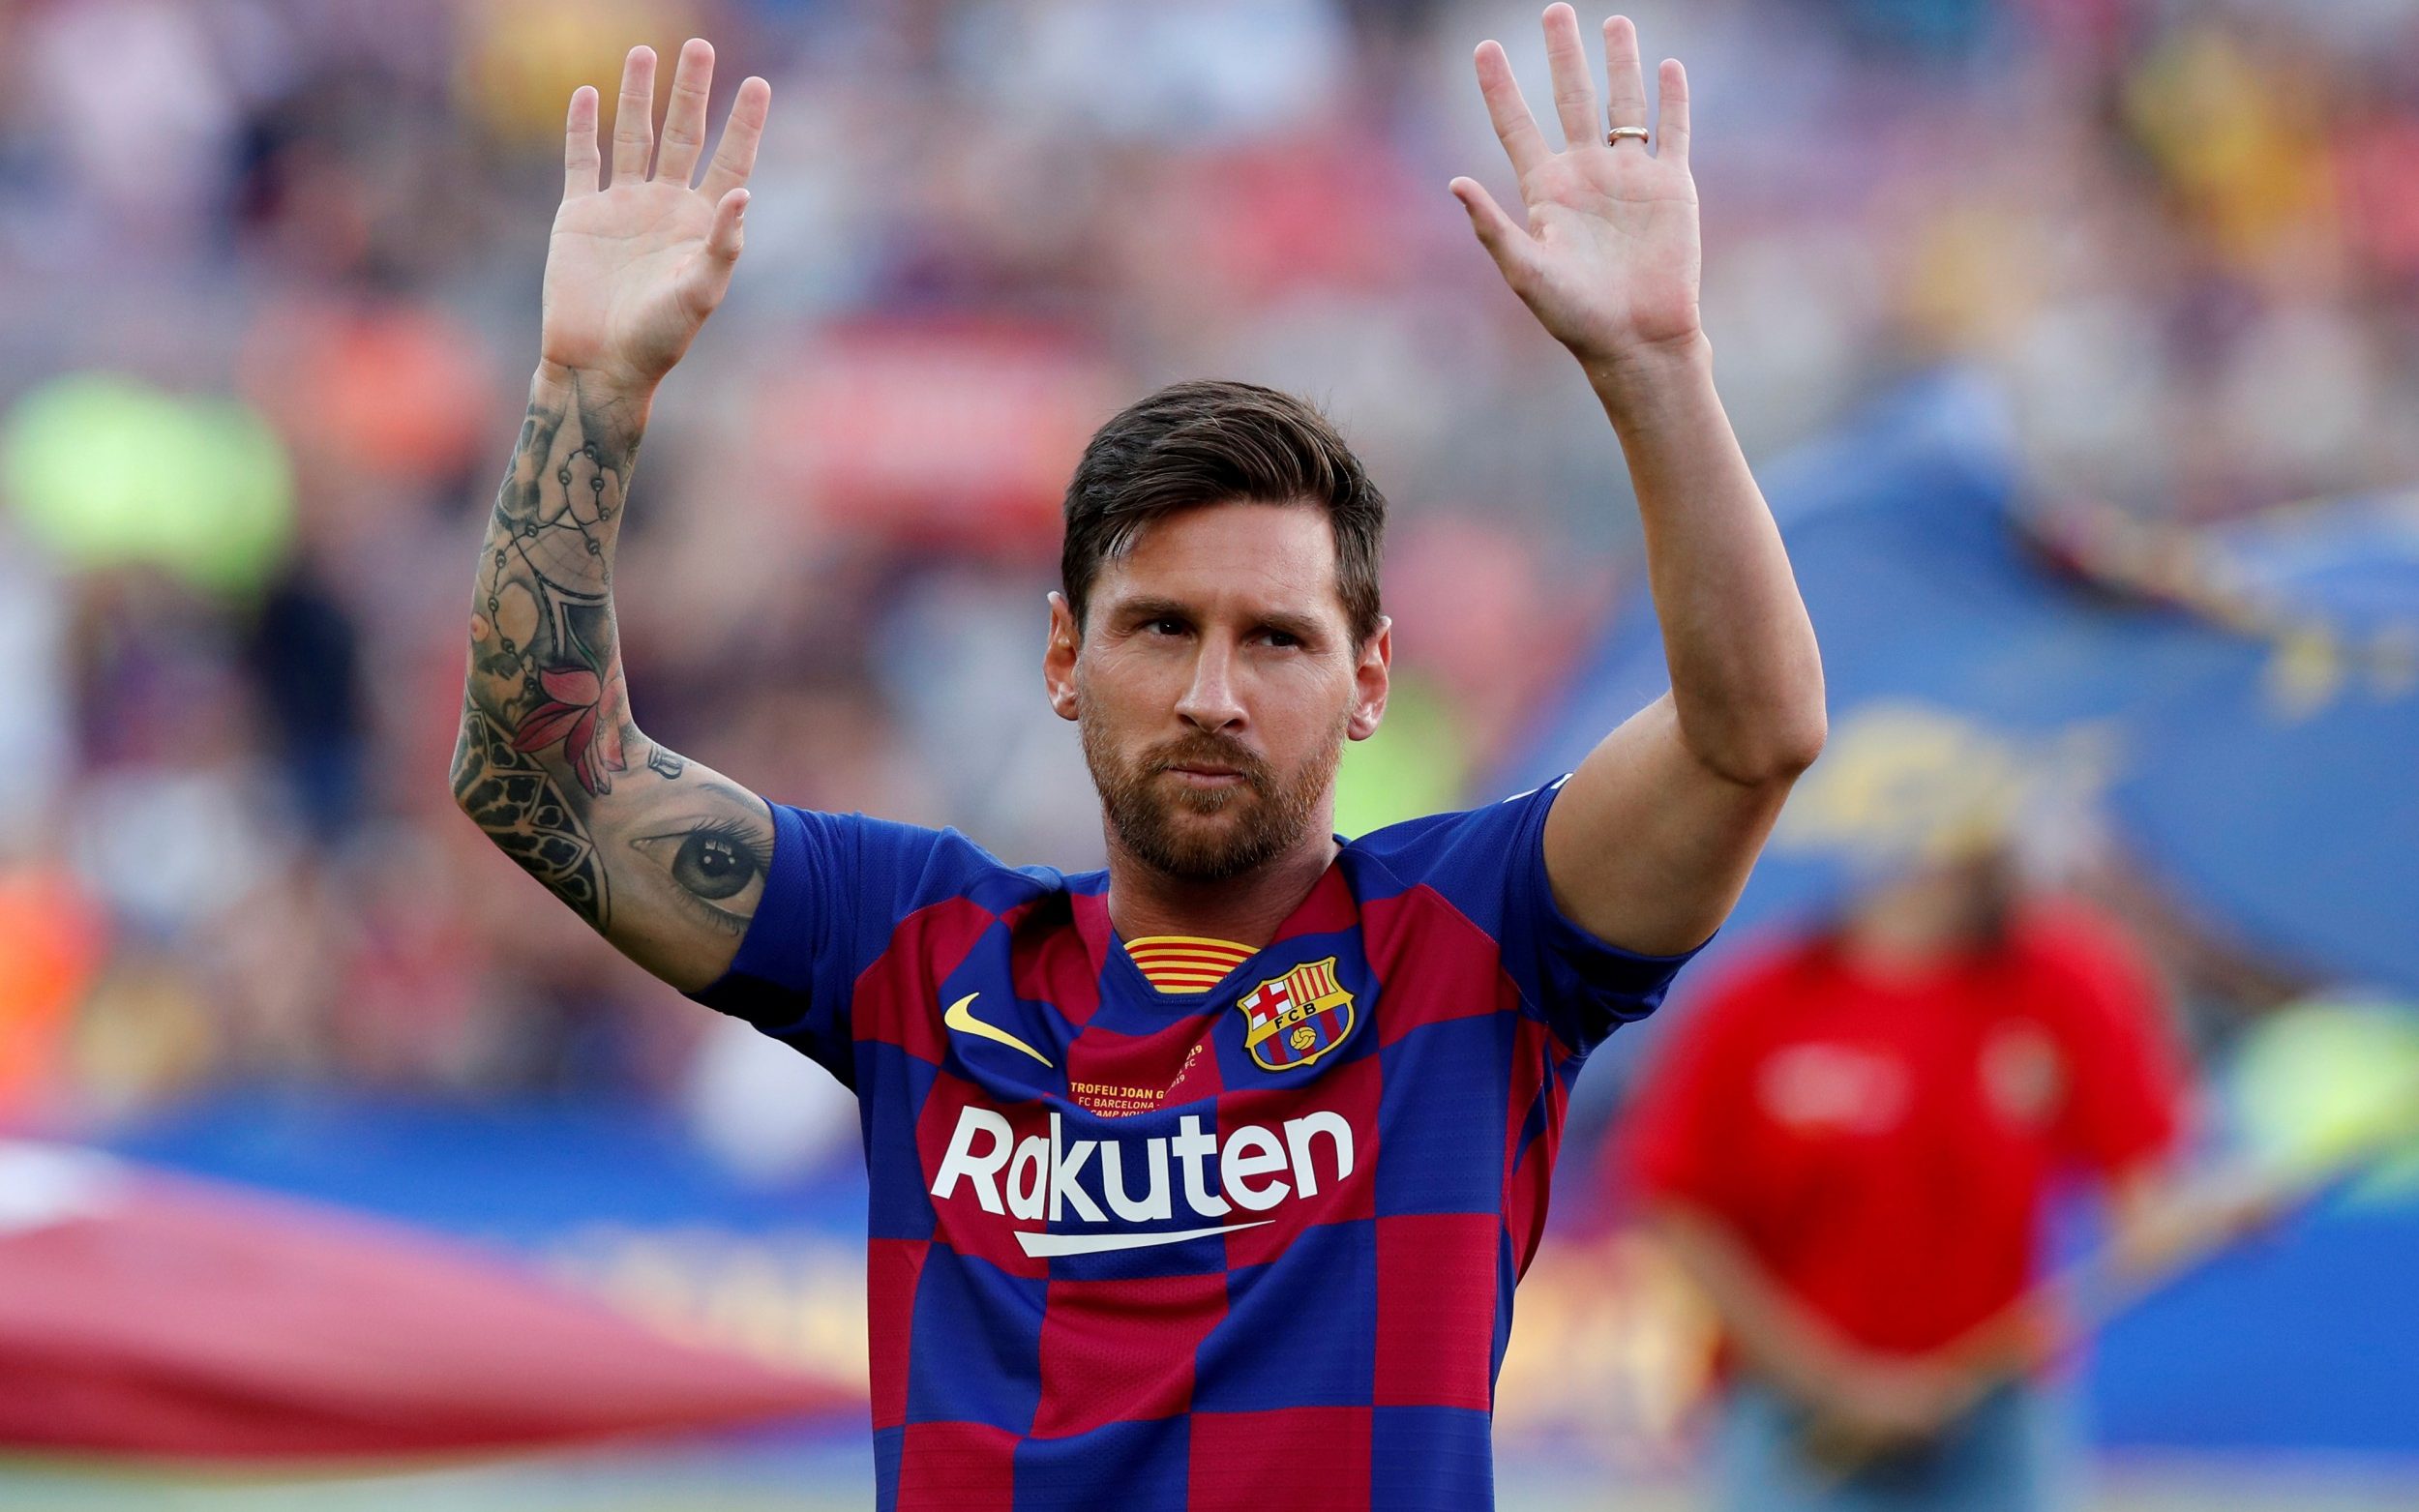 After a 17-year career, Barcelona officially announces Messi’s departure